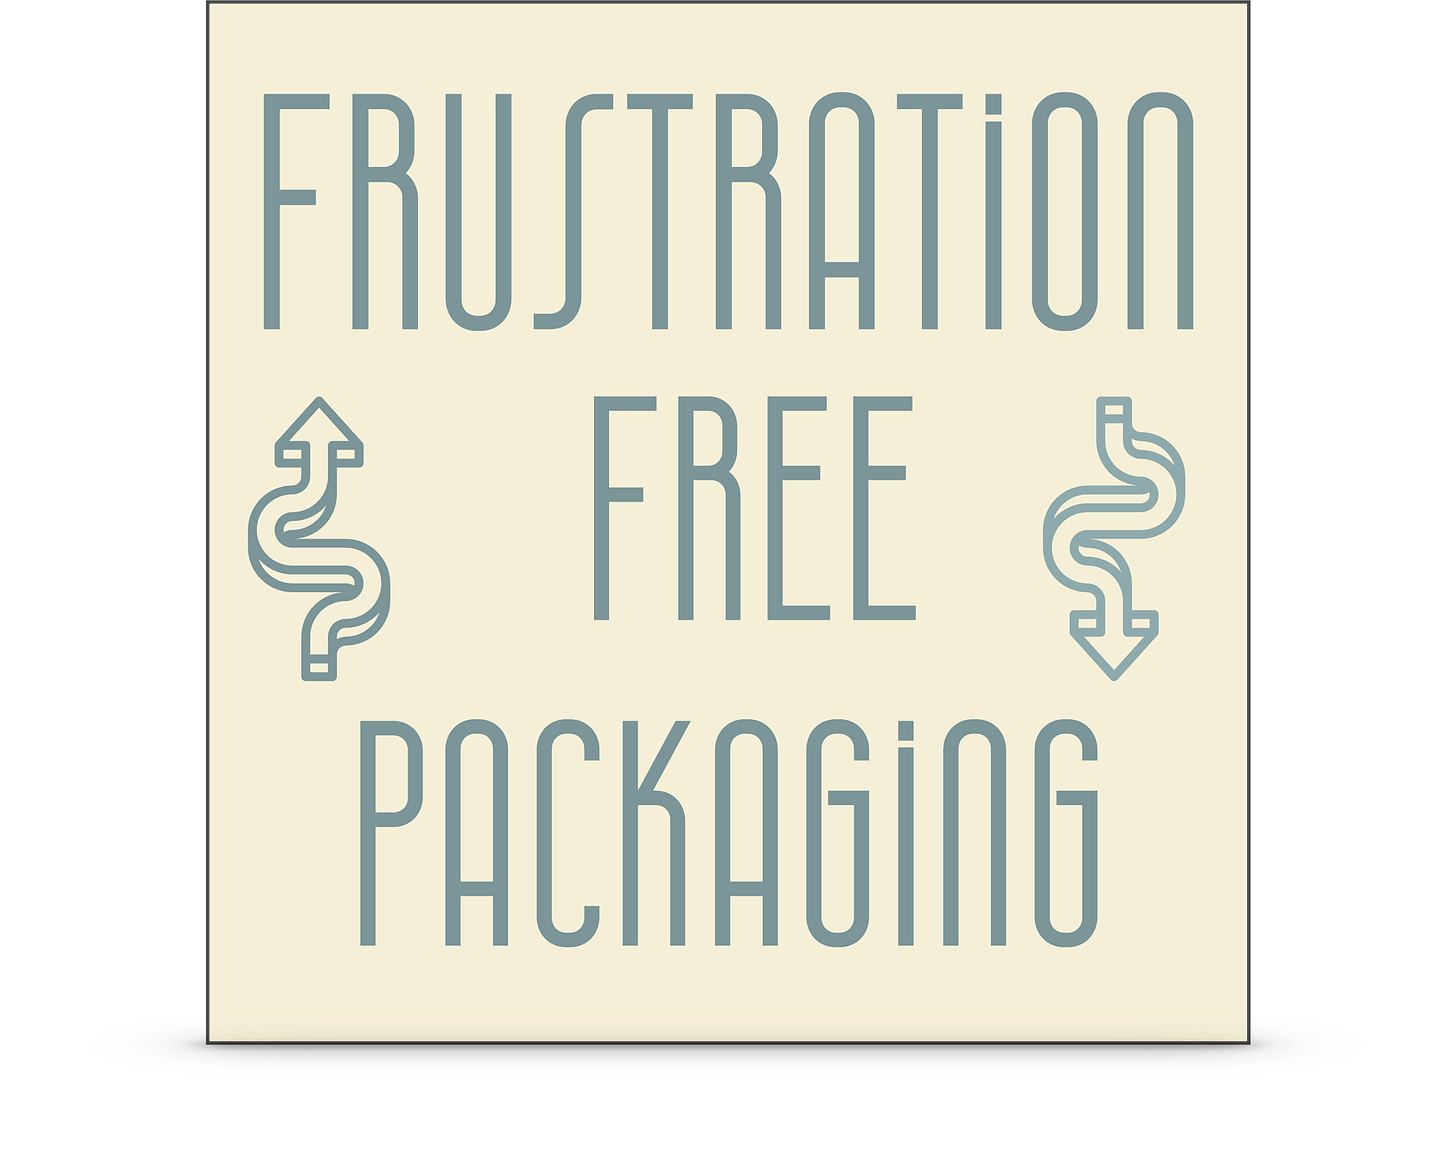 banne graphic reading "Frustration Free Packaging" with two wavy lines, one pointing up, one pointing down